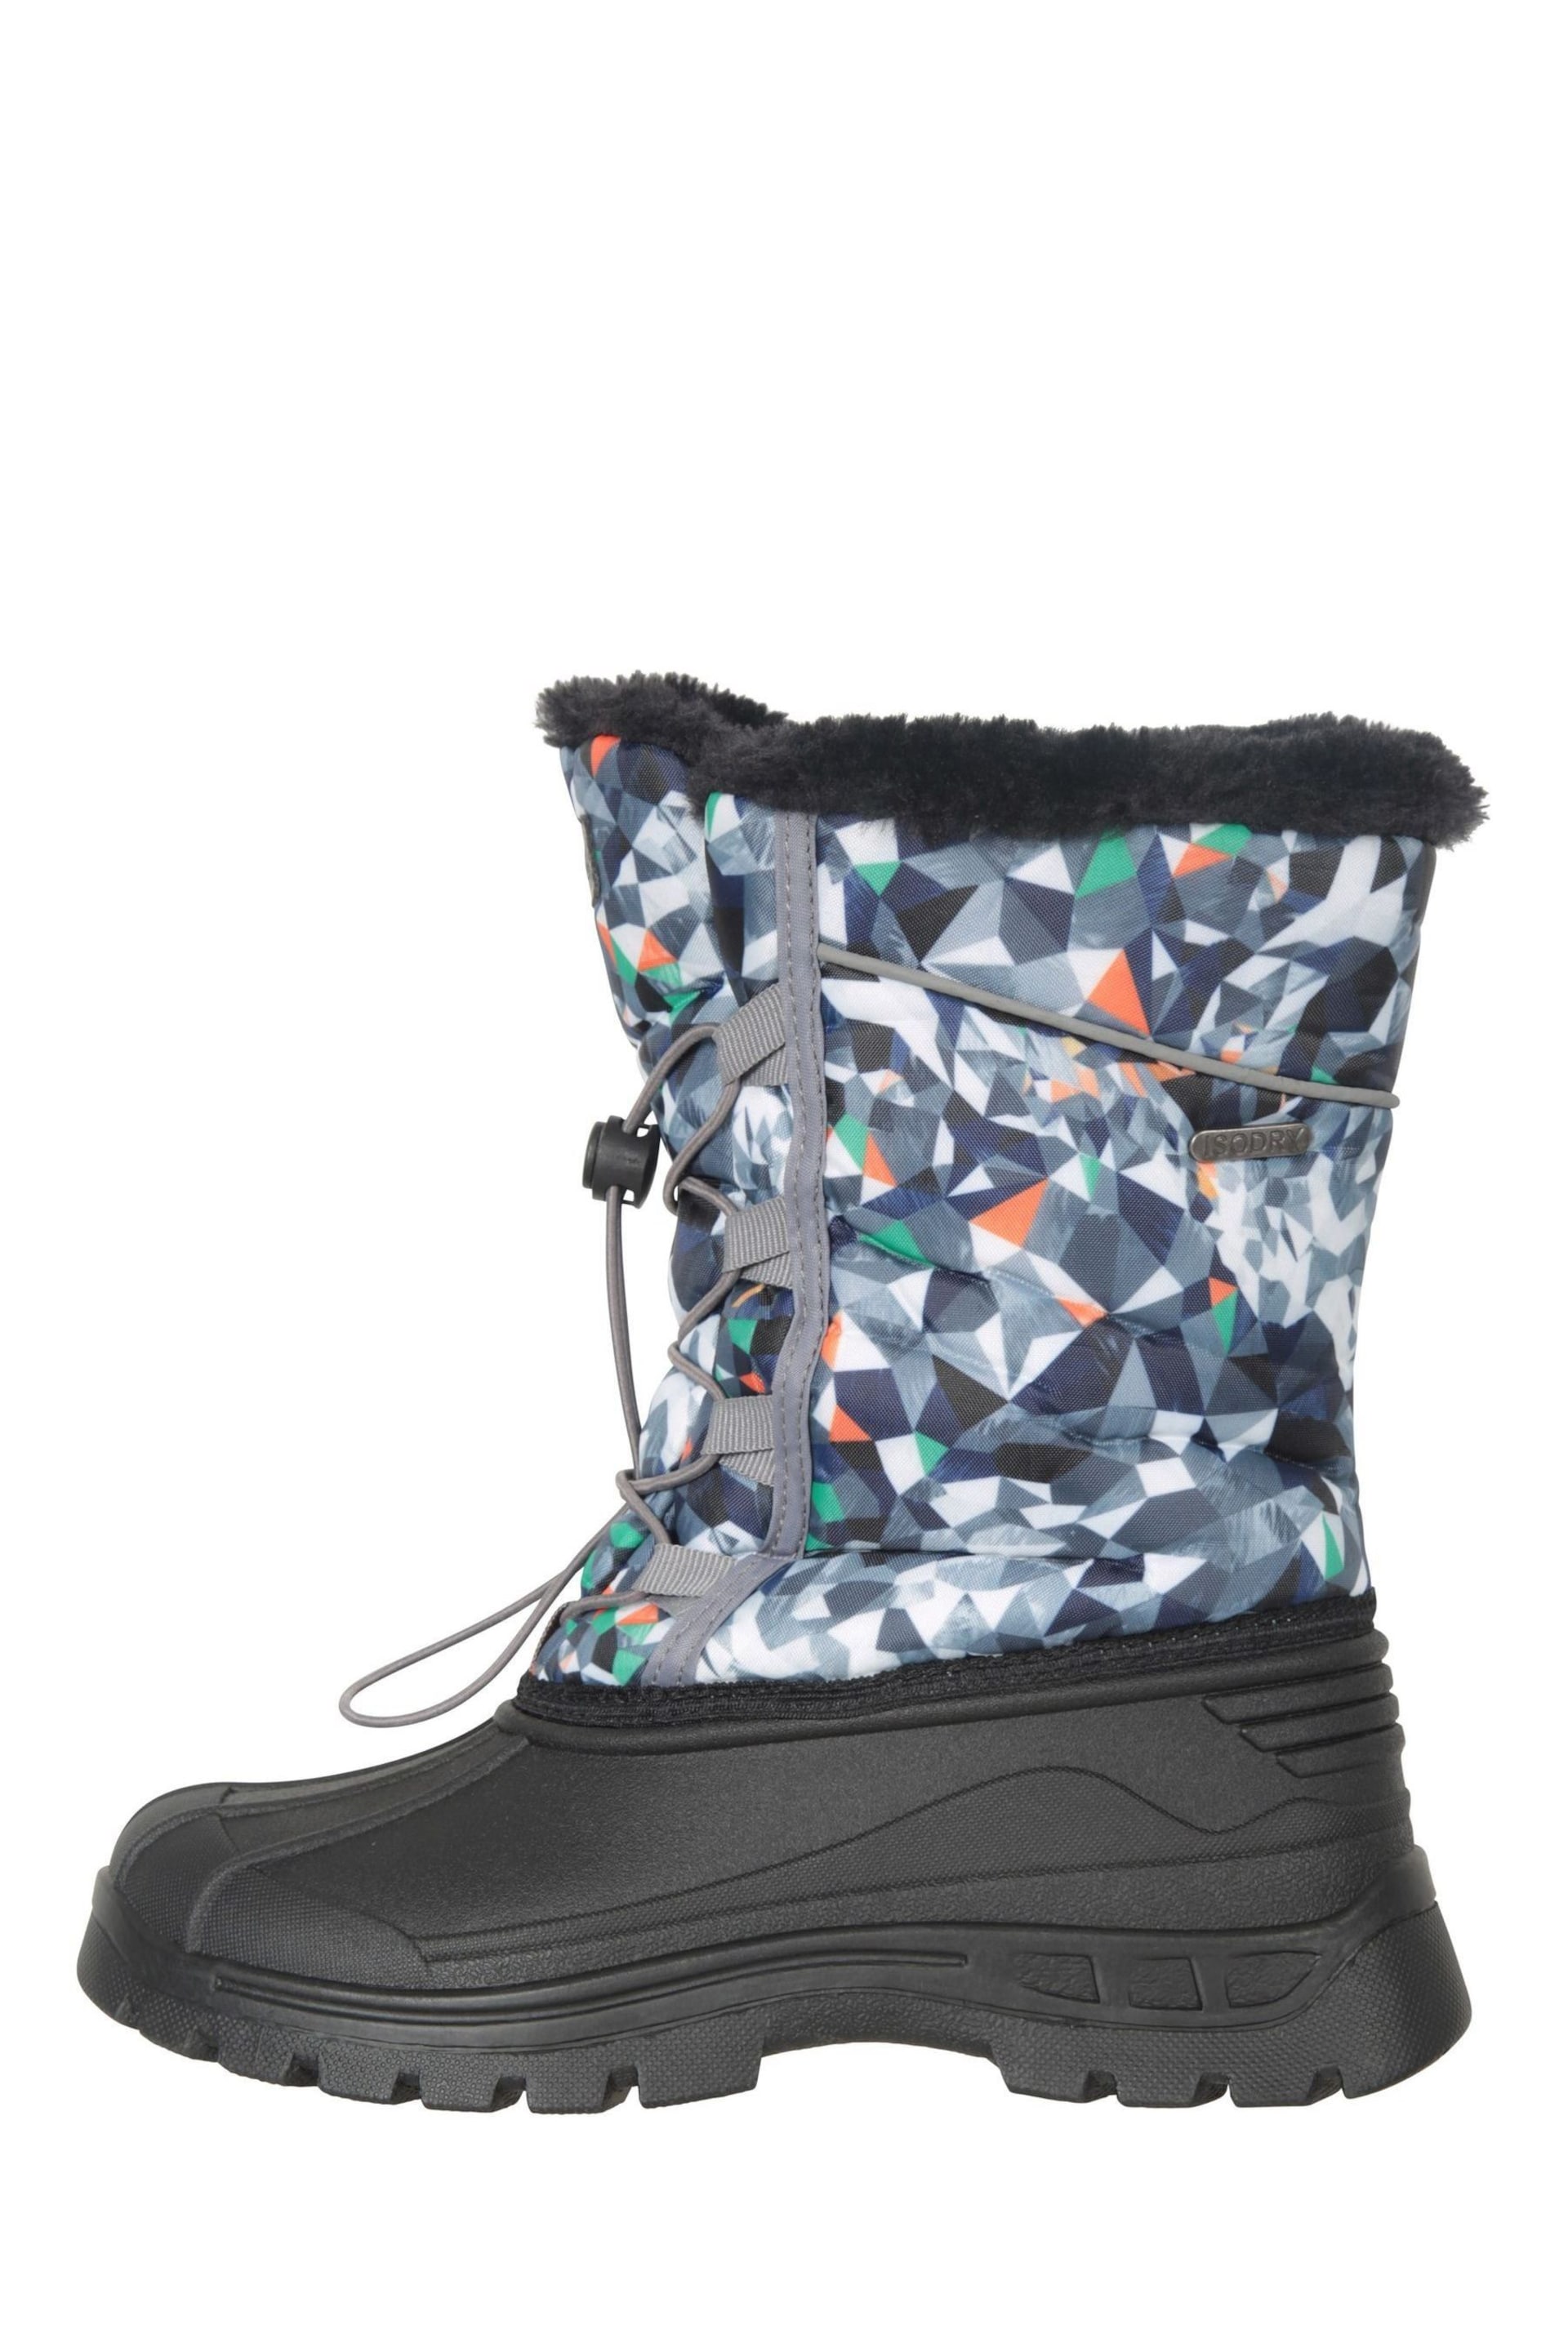 Mountain Warehouse Multi Kids Whistler Sherpa Lined Snow Boots - Image 3 of 6